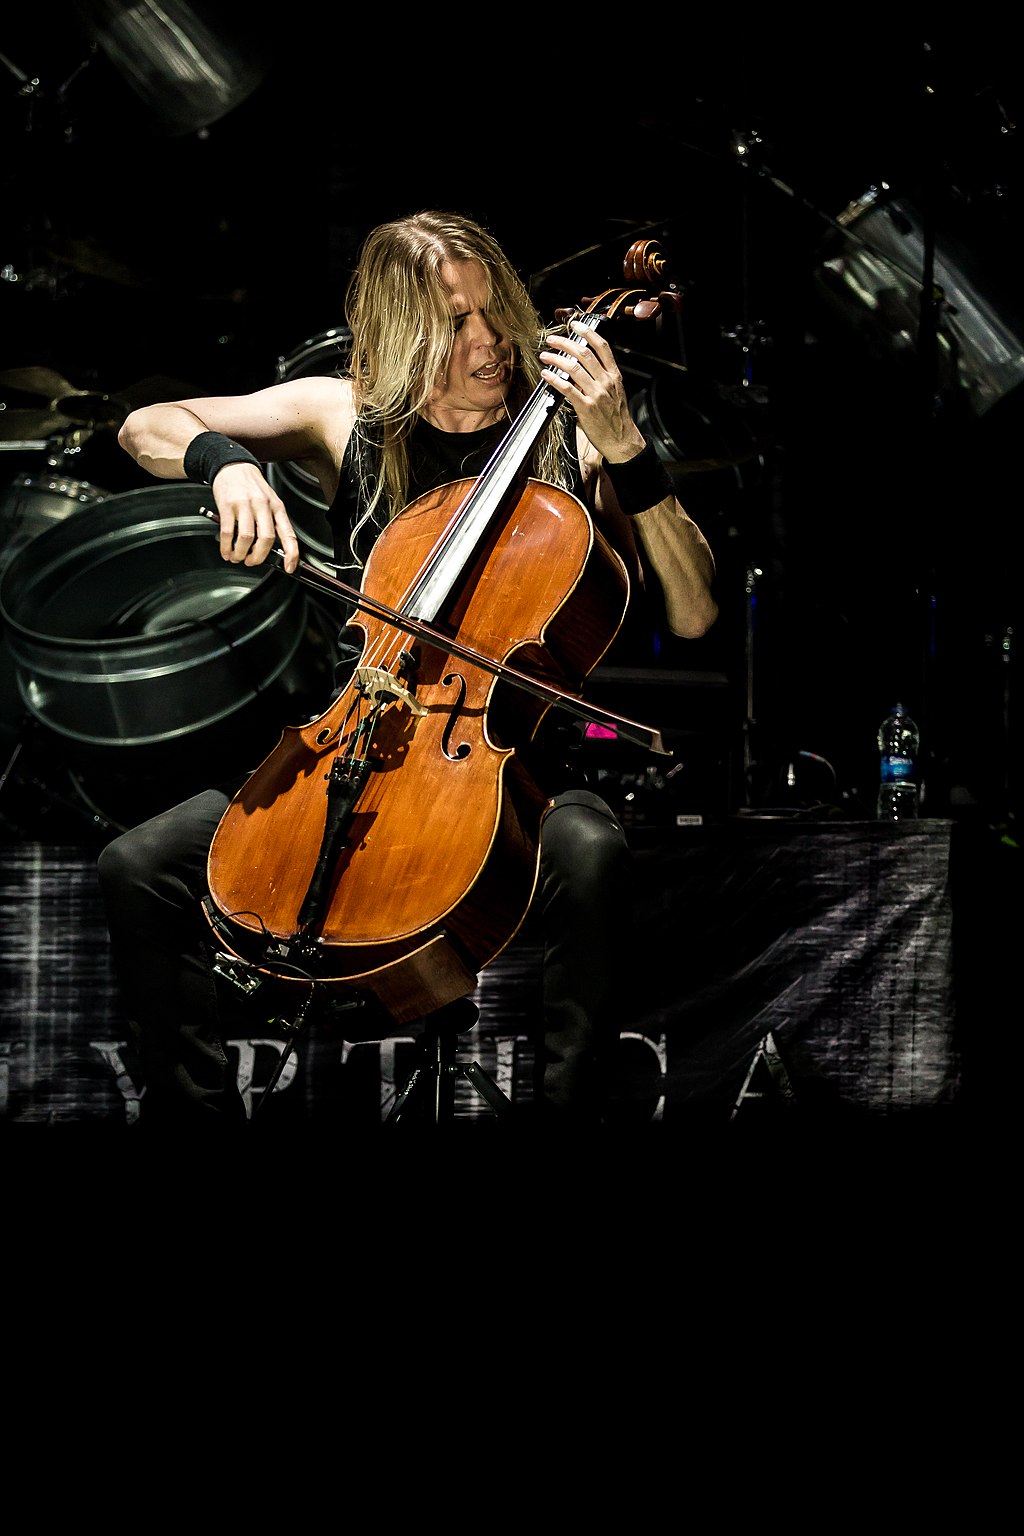 Eicca playing cello 